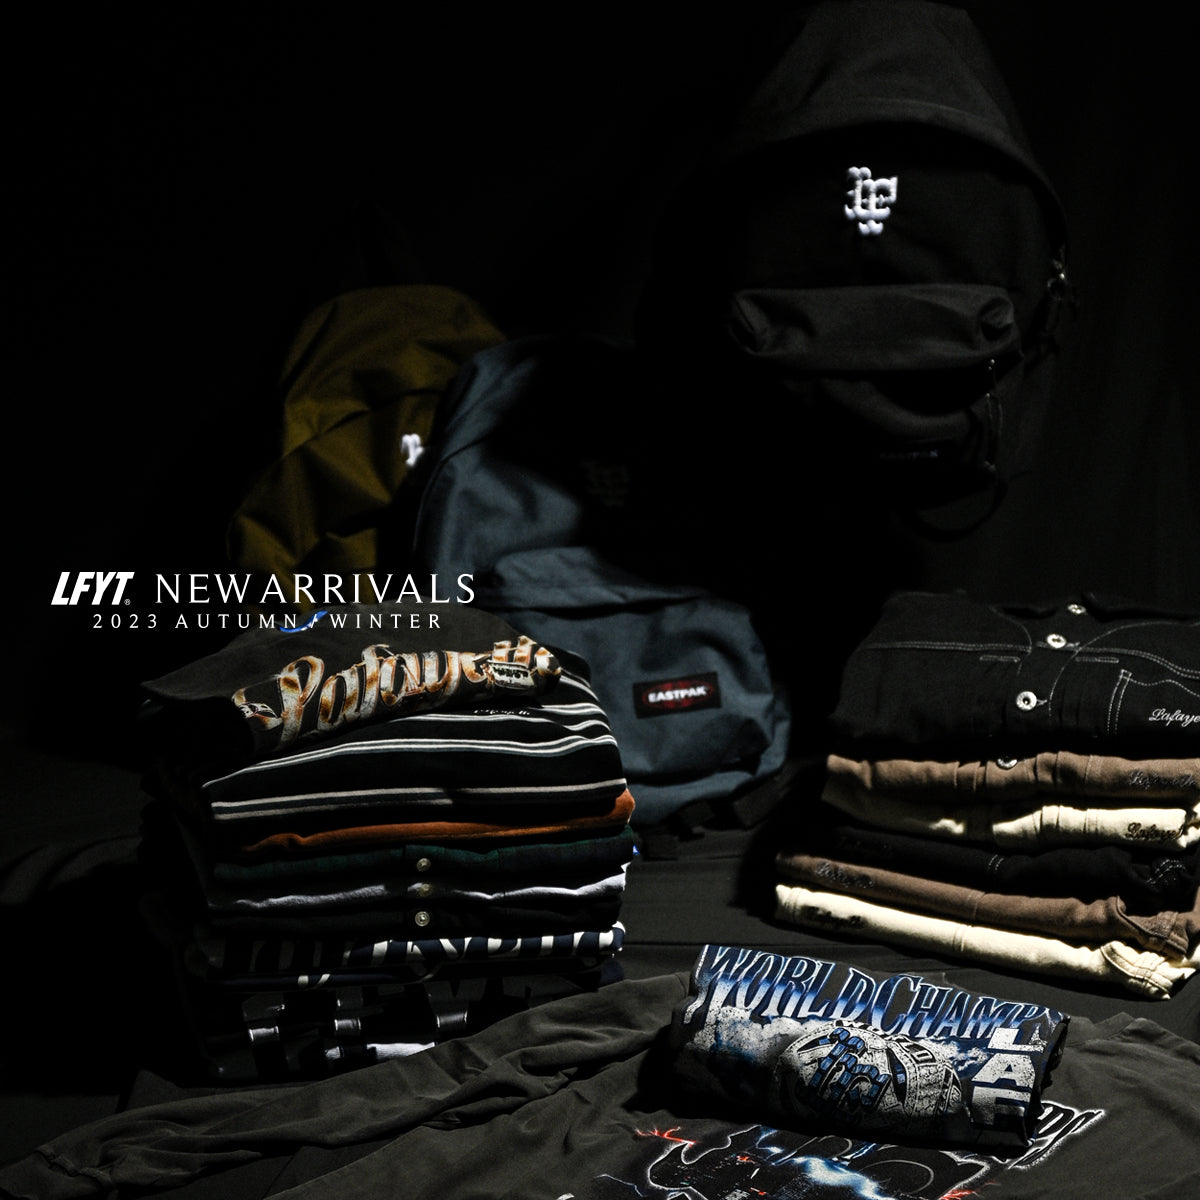 LFYT 2023 A/W 3rd. Delivery